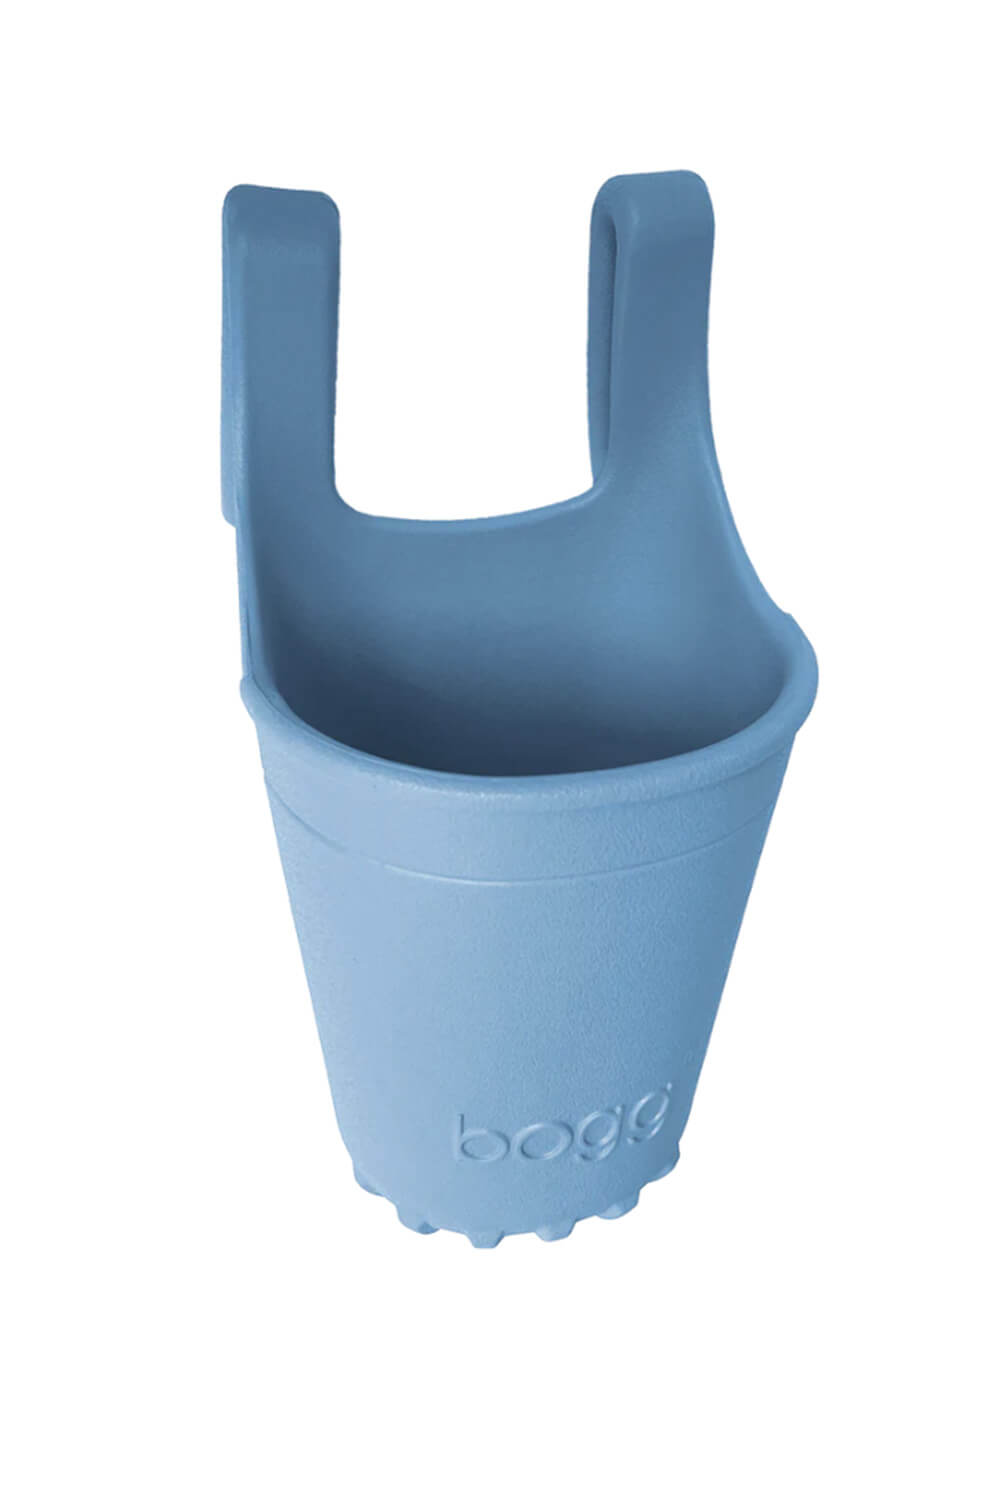 Bogg Bag Cup Holder, Bogg Cup Holder, Simply Southern Cup Holder, Rubber  Bag Cup Holder, Bogg Bag Accessories, Beach Bag Cup Holder